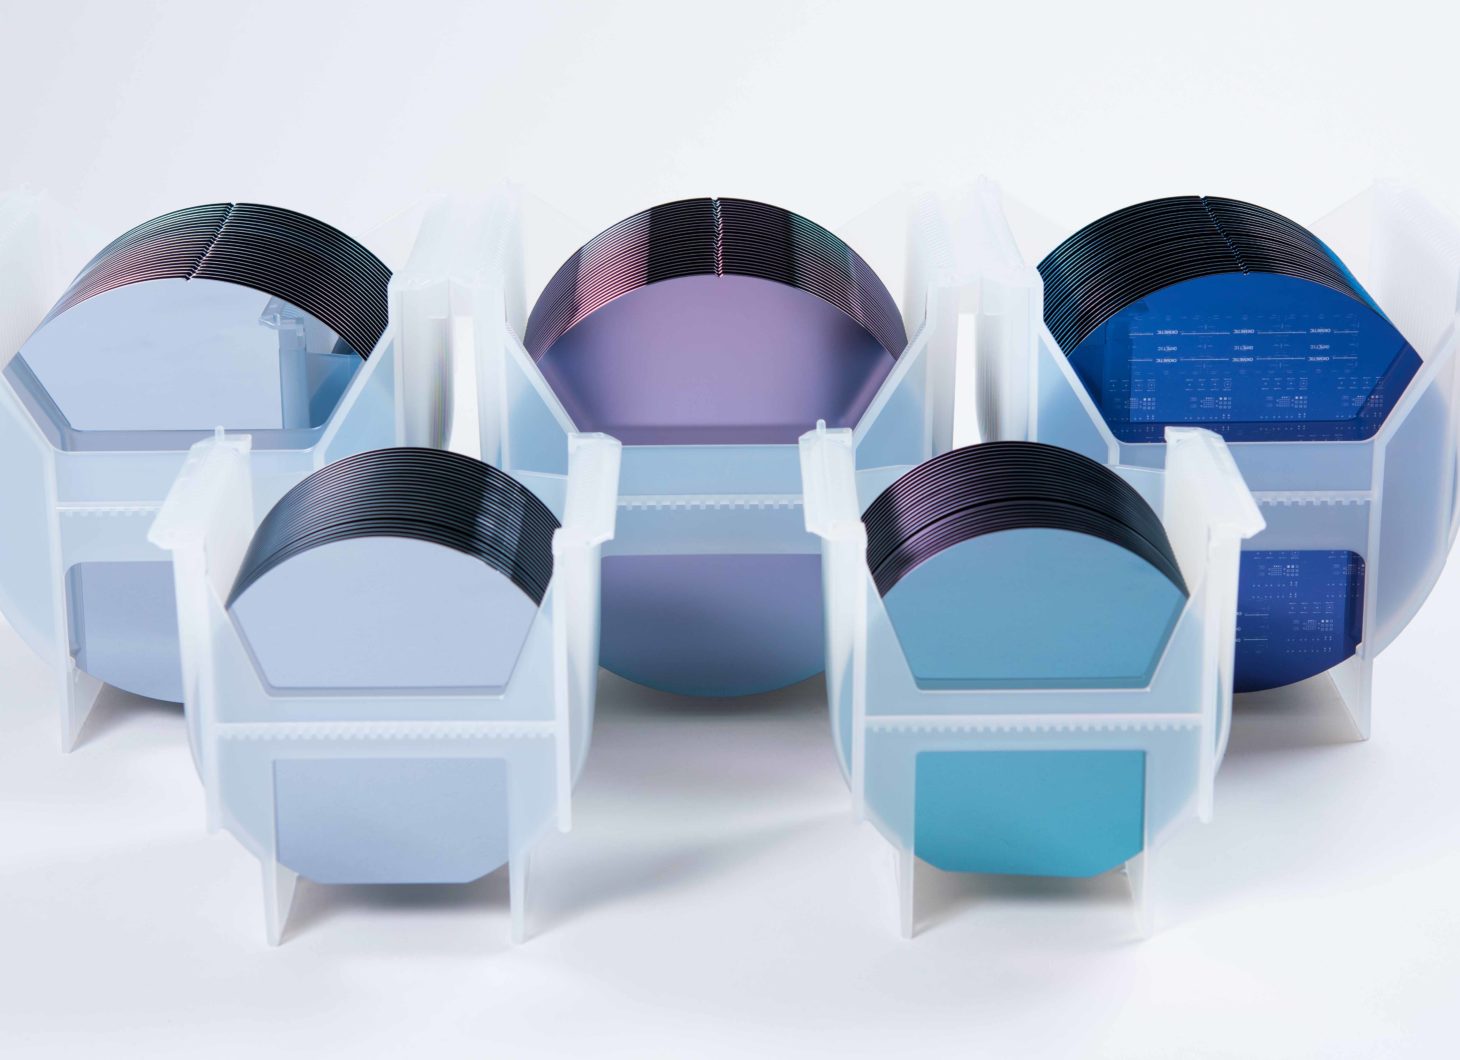 Advanced engineered silicon wafers